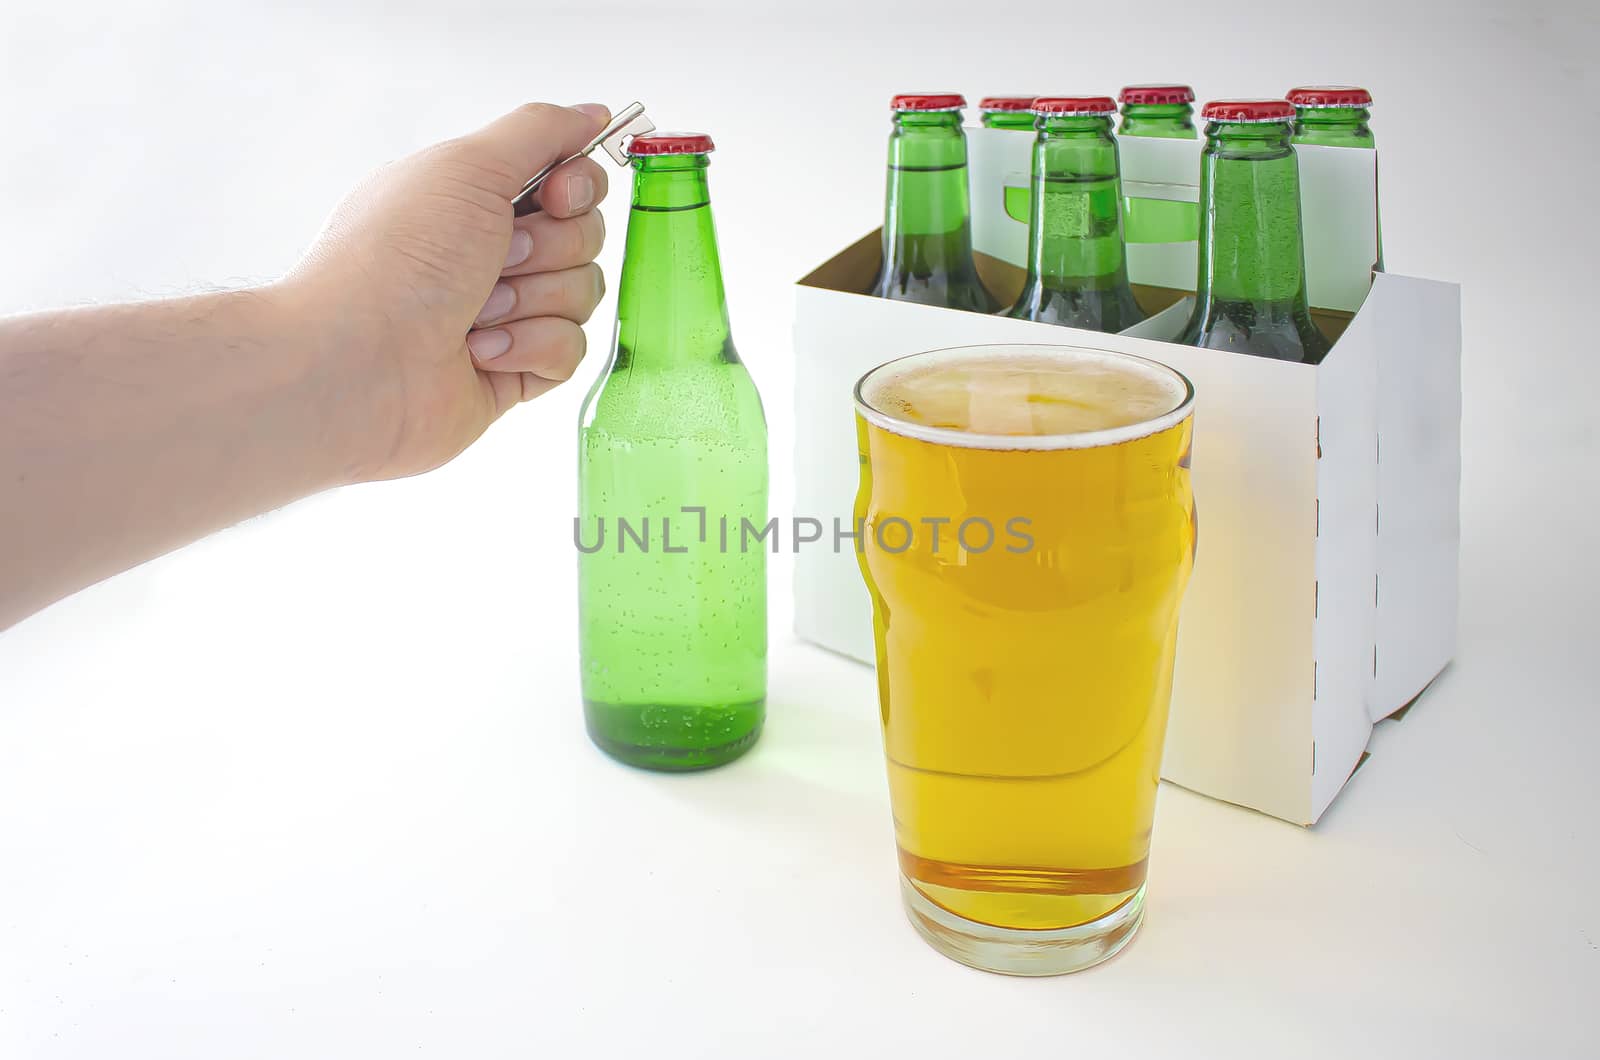 A person opening a Pilsner Style Lager green bottle sic pack with a full pint of beer by oasisamuel